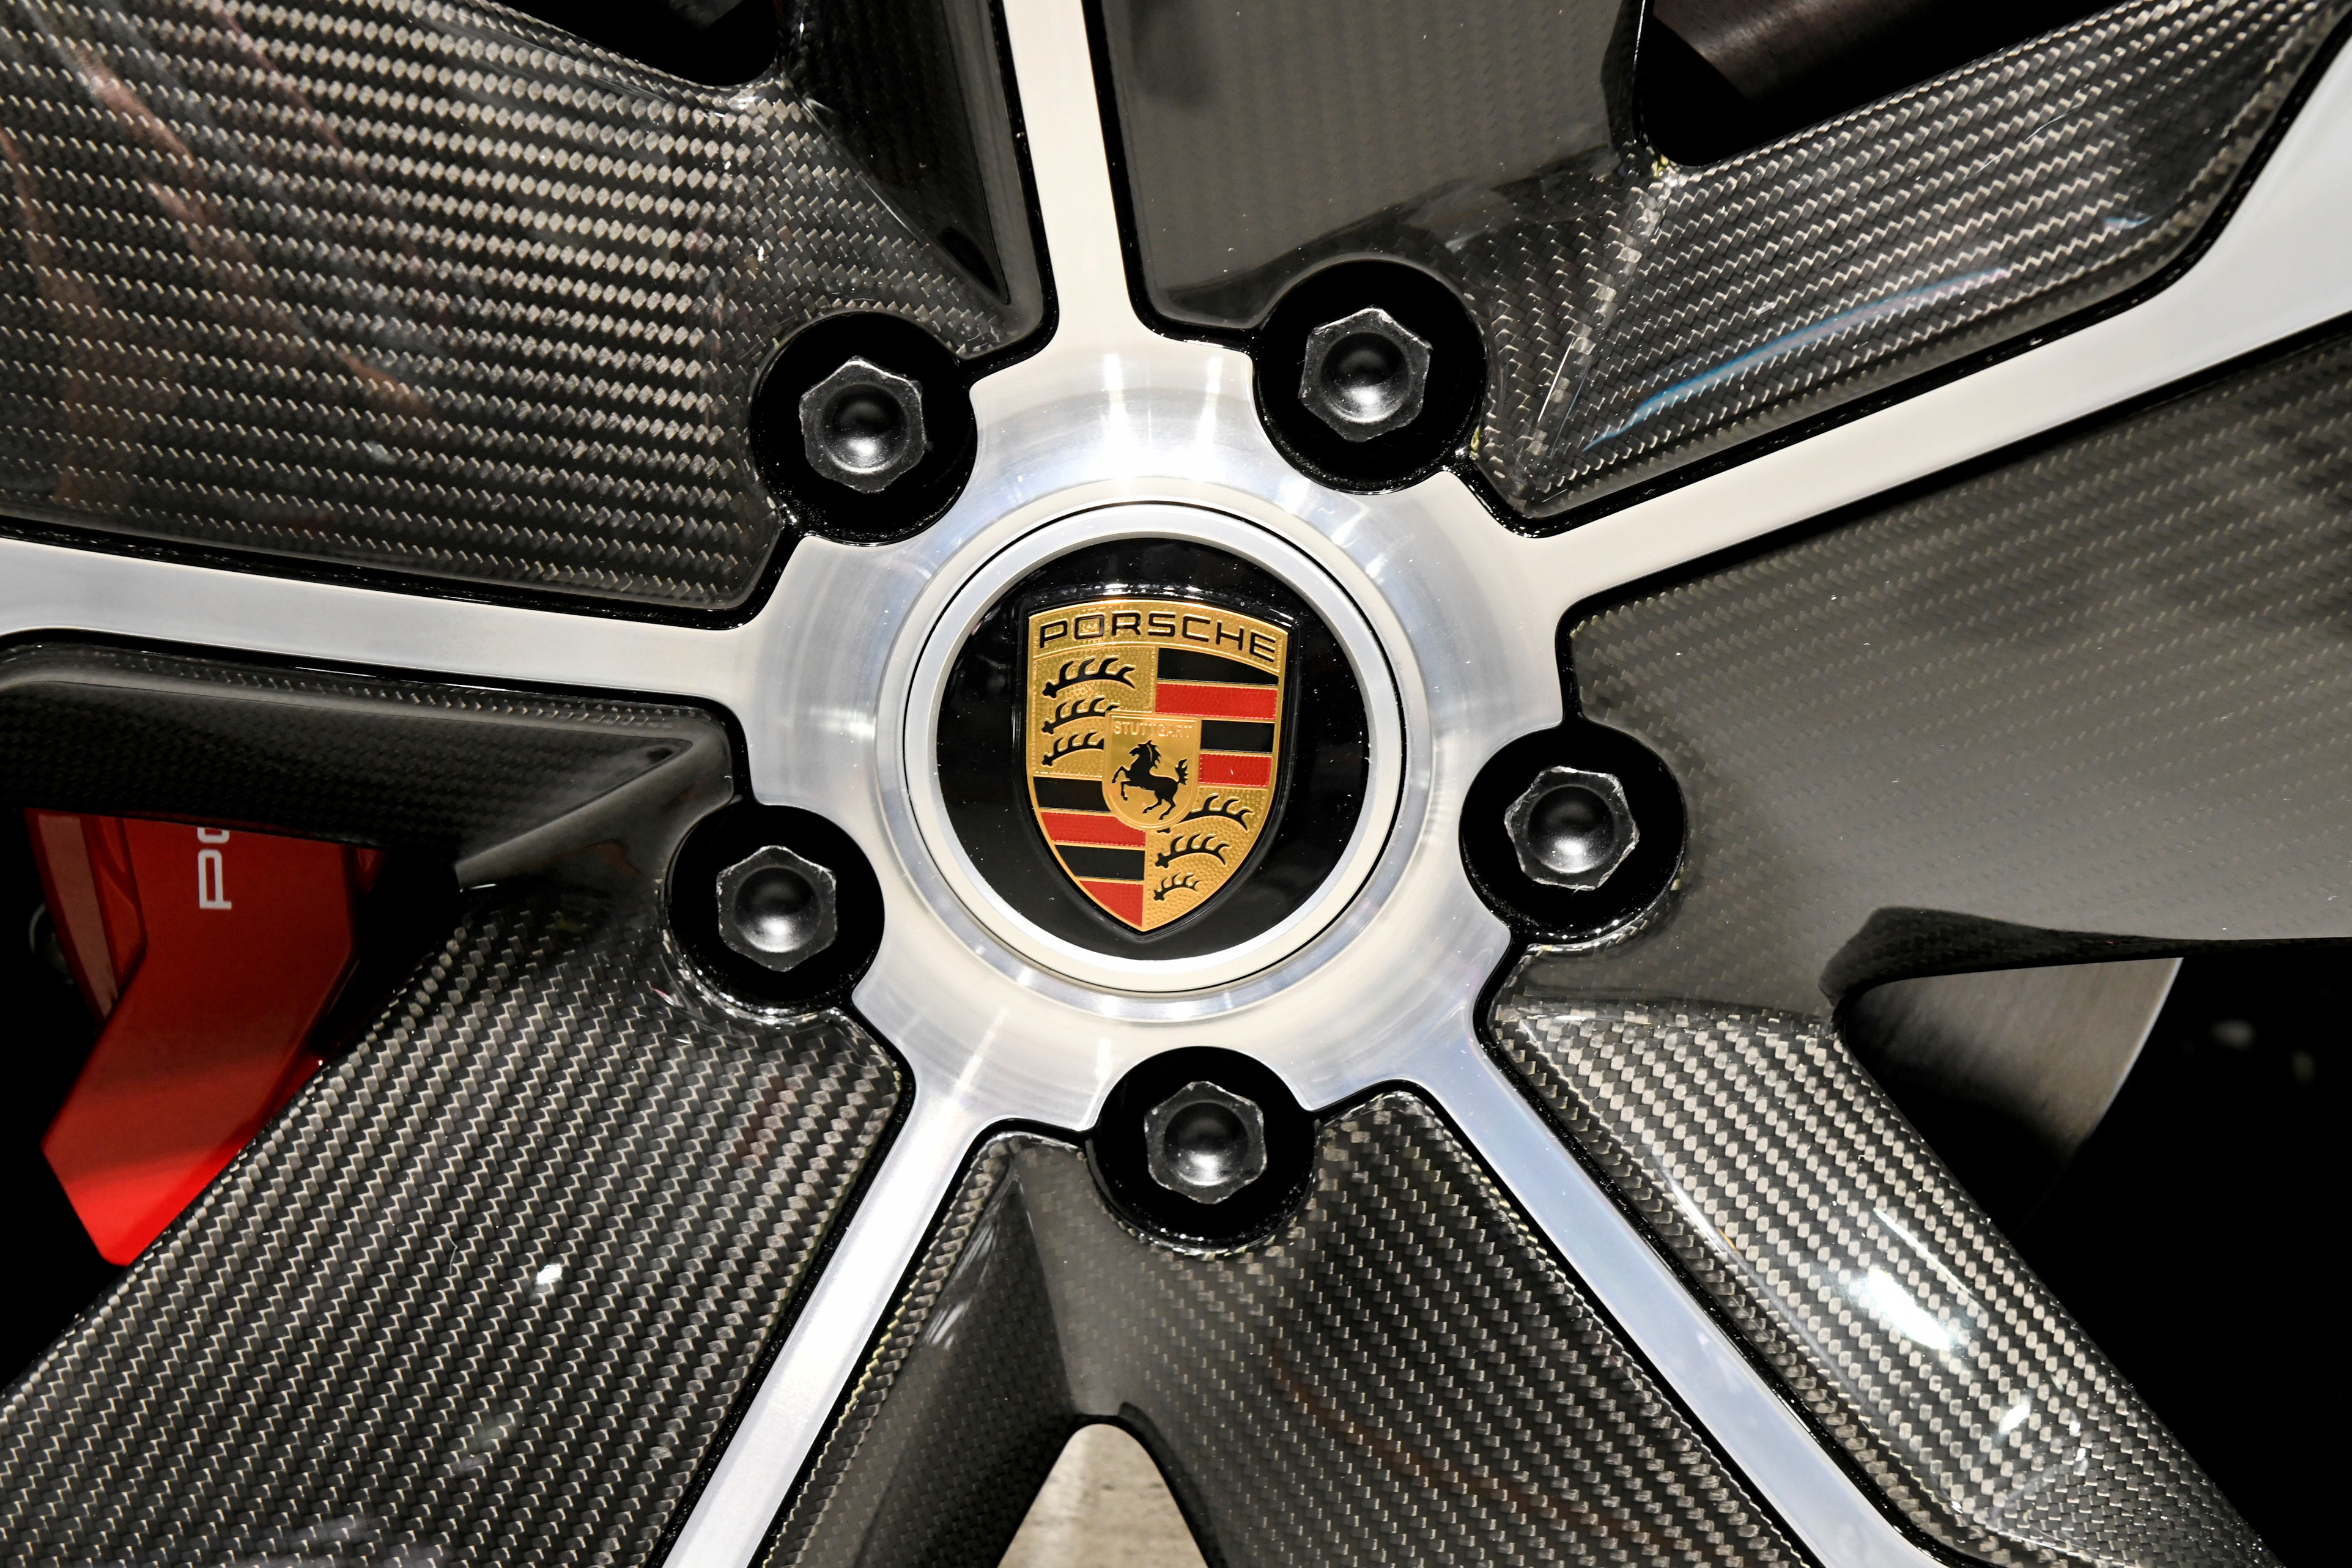 The Porsche logo is seen on wheel as Porsche's new Taycan 4S is revealed at the LA Auto Show in Los Angeles, California, U.S., November 20, 2019. REUTERS/Andrew Cullen/Files